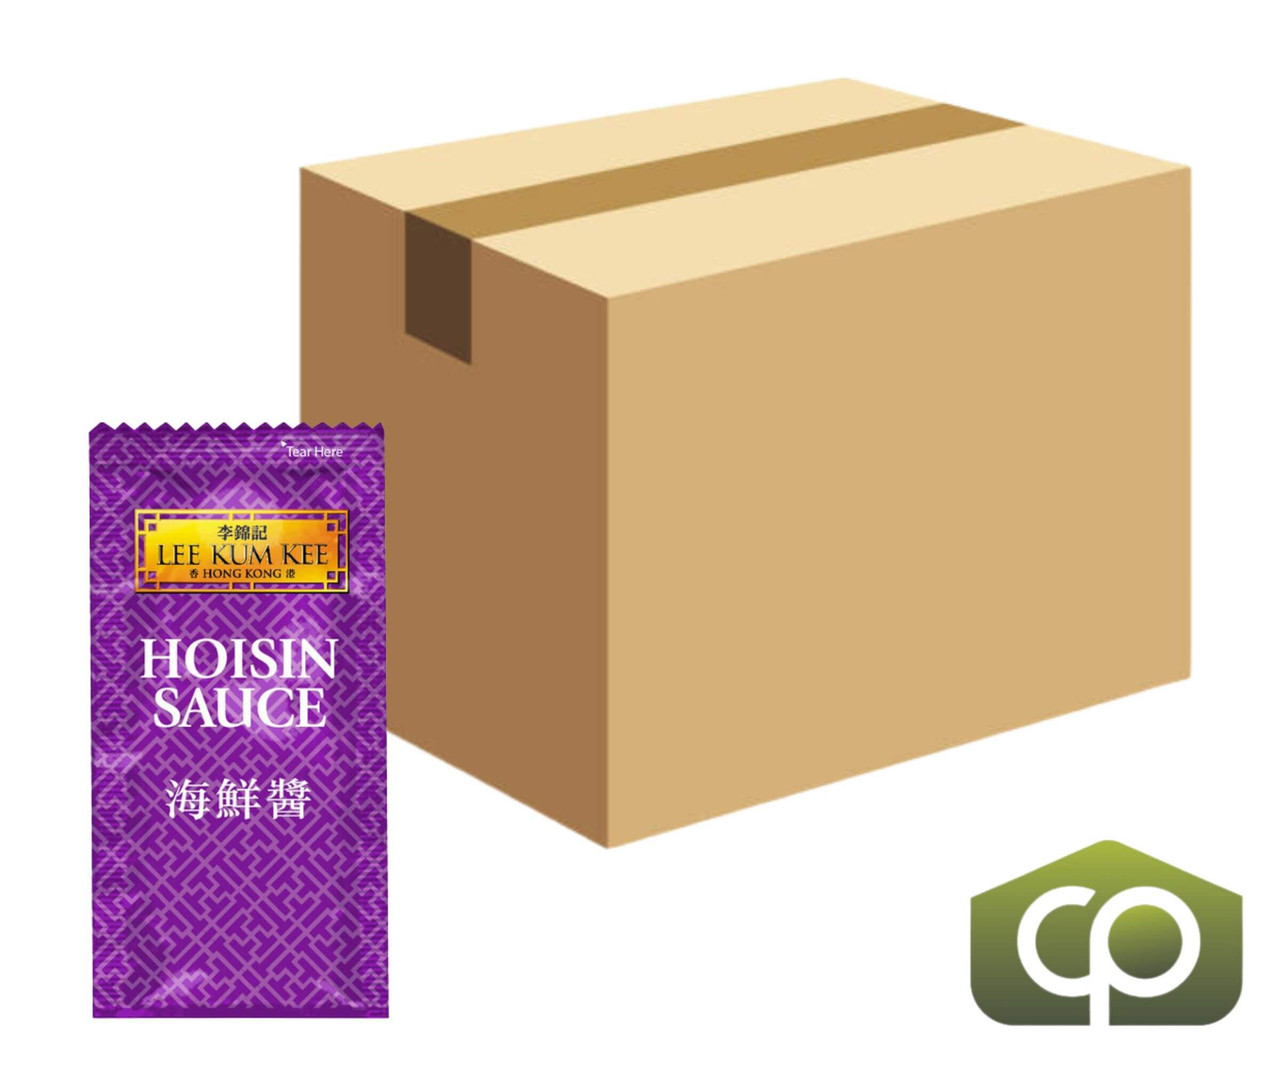 Lee Kum Kee Hoisin Sauce Packets - 8mL, 500/Case - Traditional Chinese Recipe - Chicken Pieces